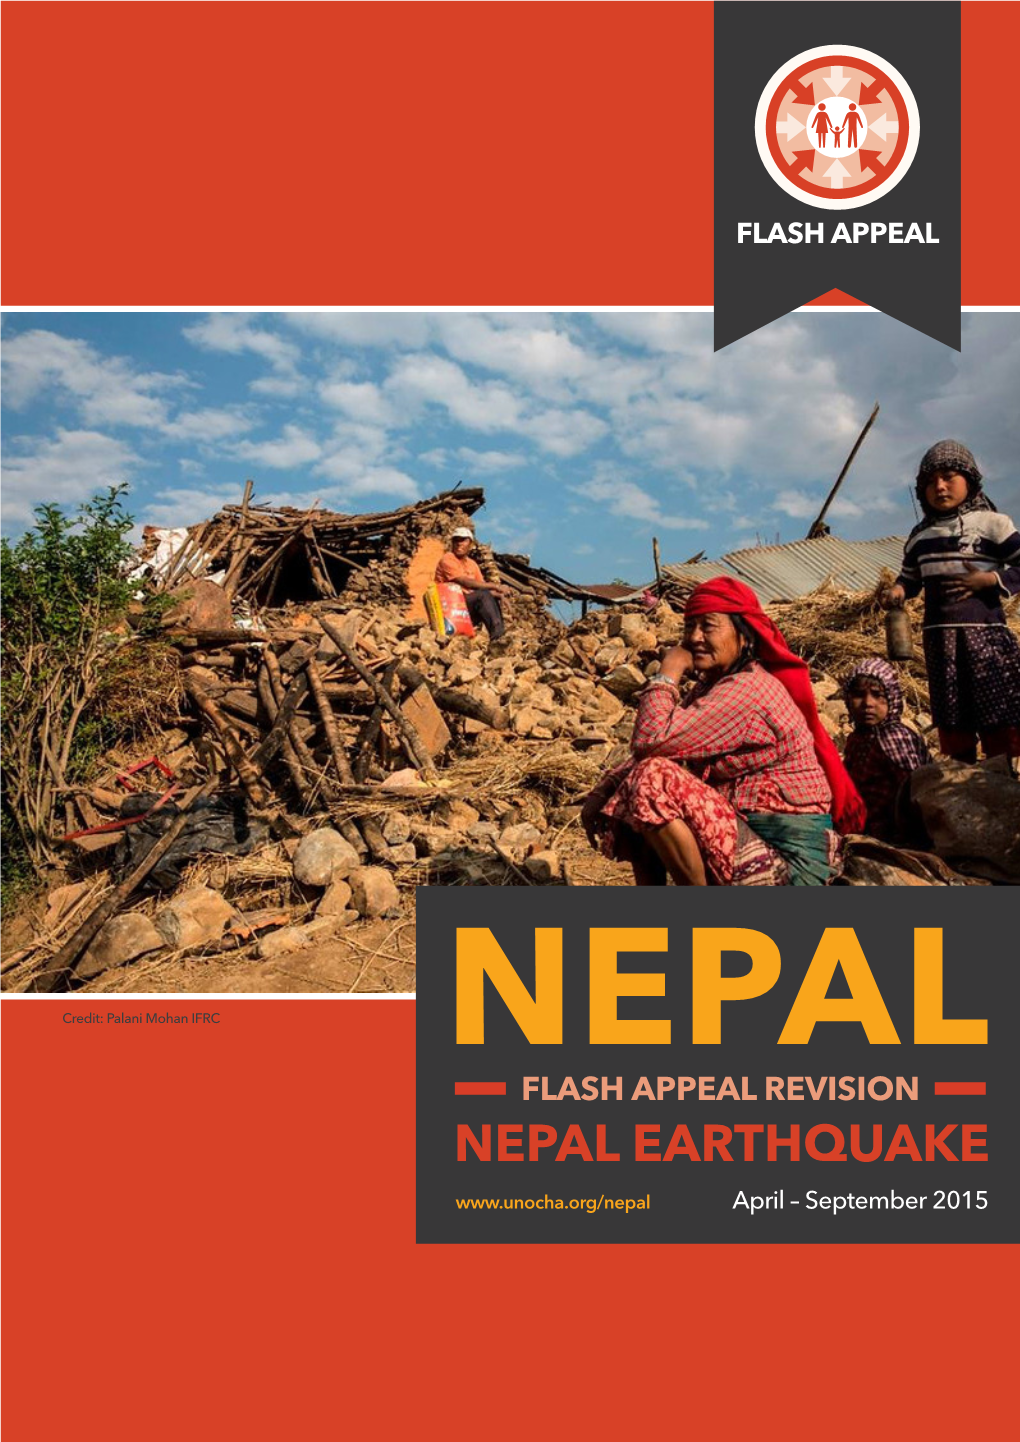 Nepal Earthquake Flash Appeal Revision